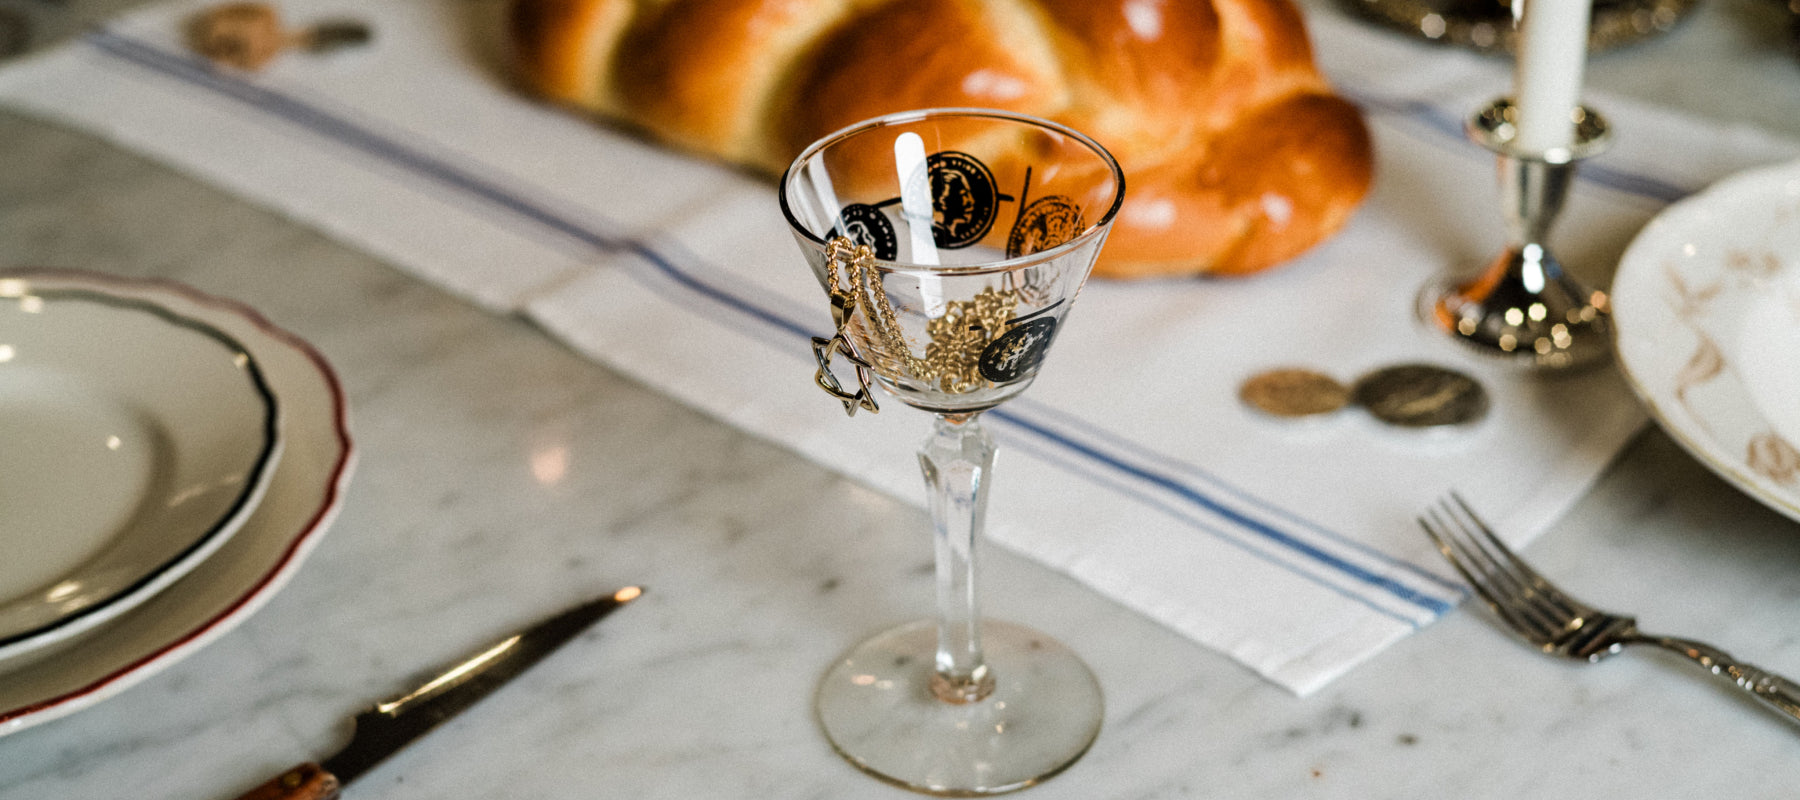 Shabbat Is a Salve, and a Scene